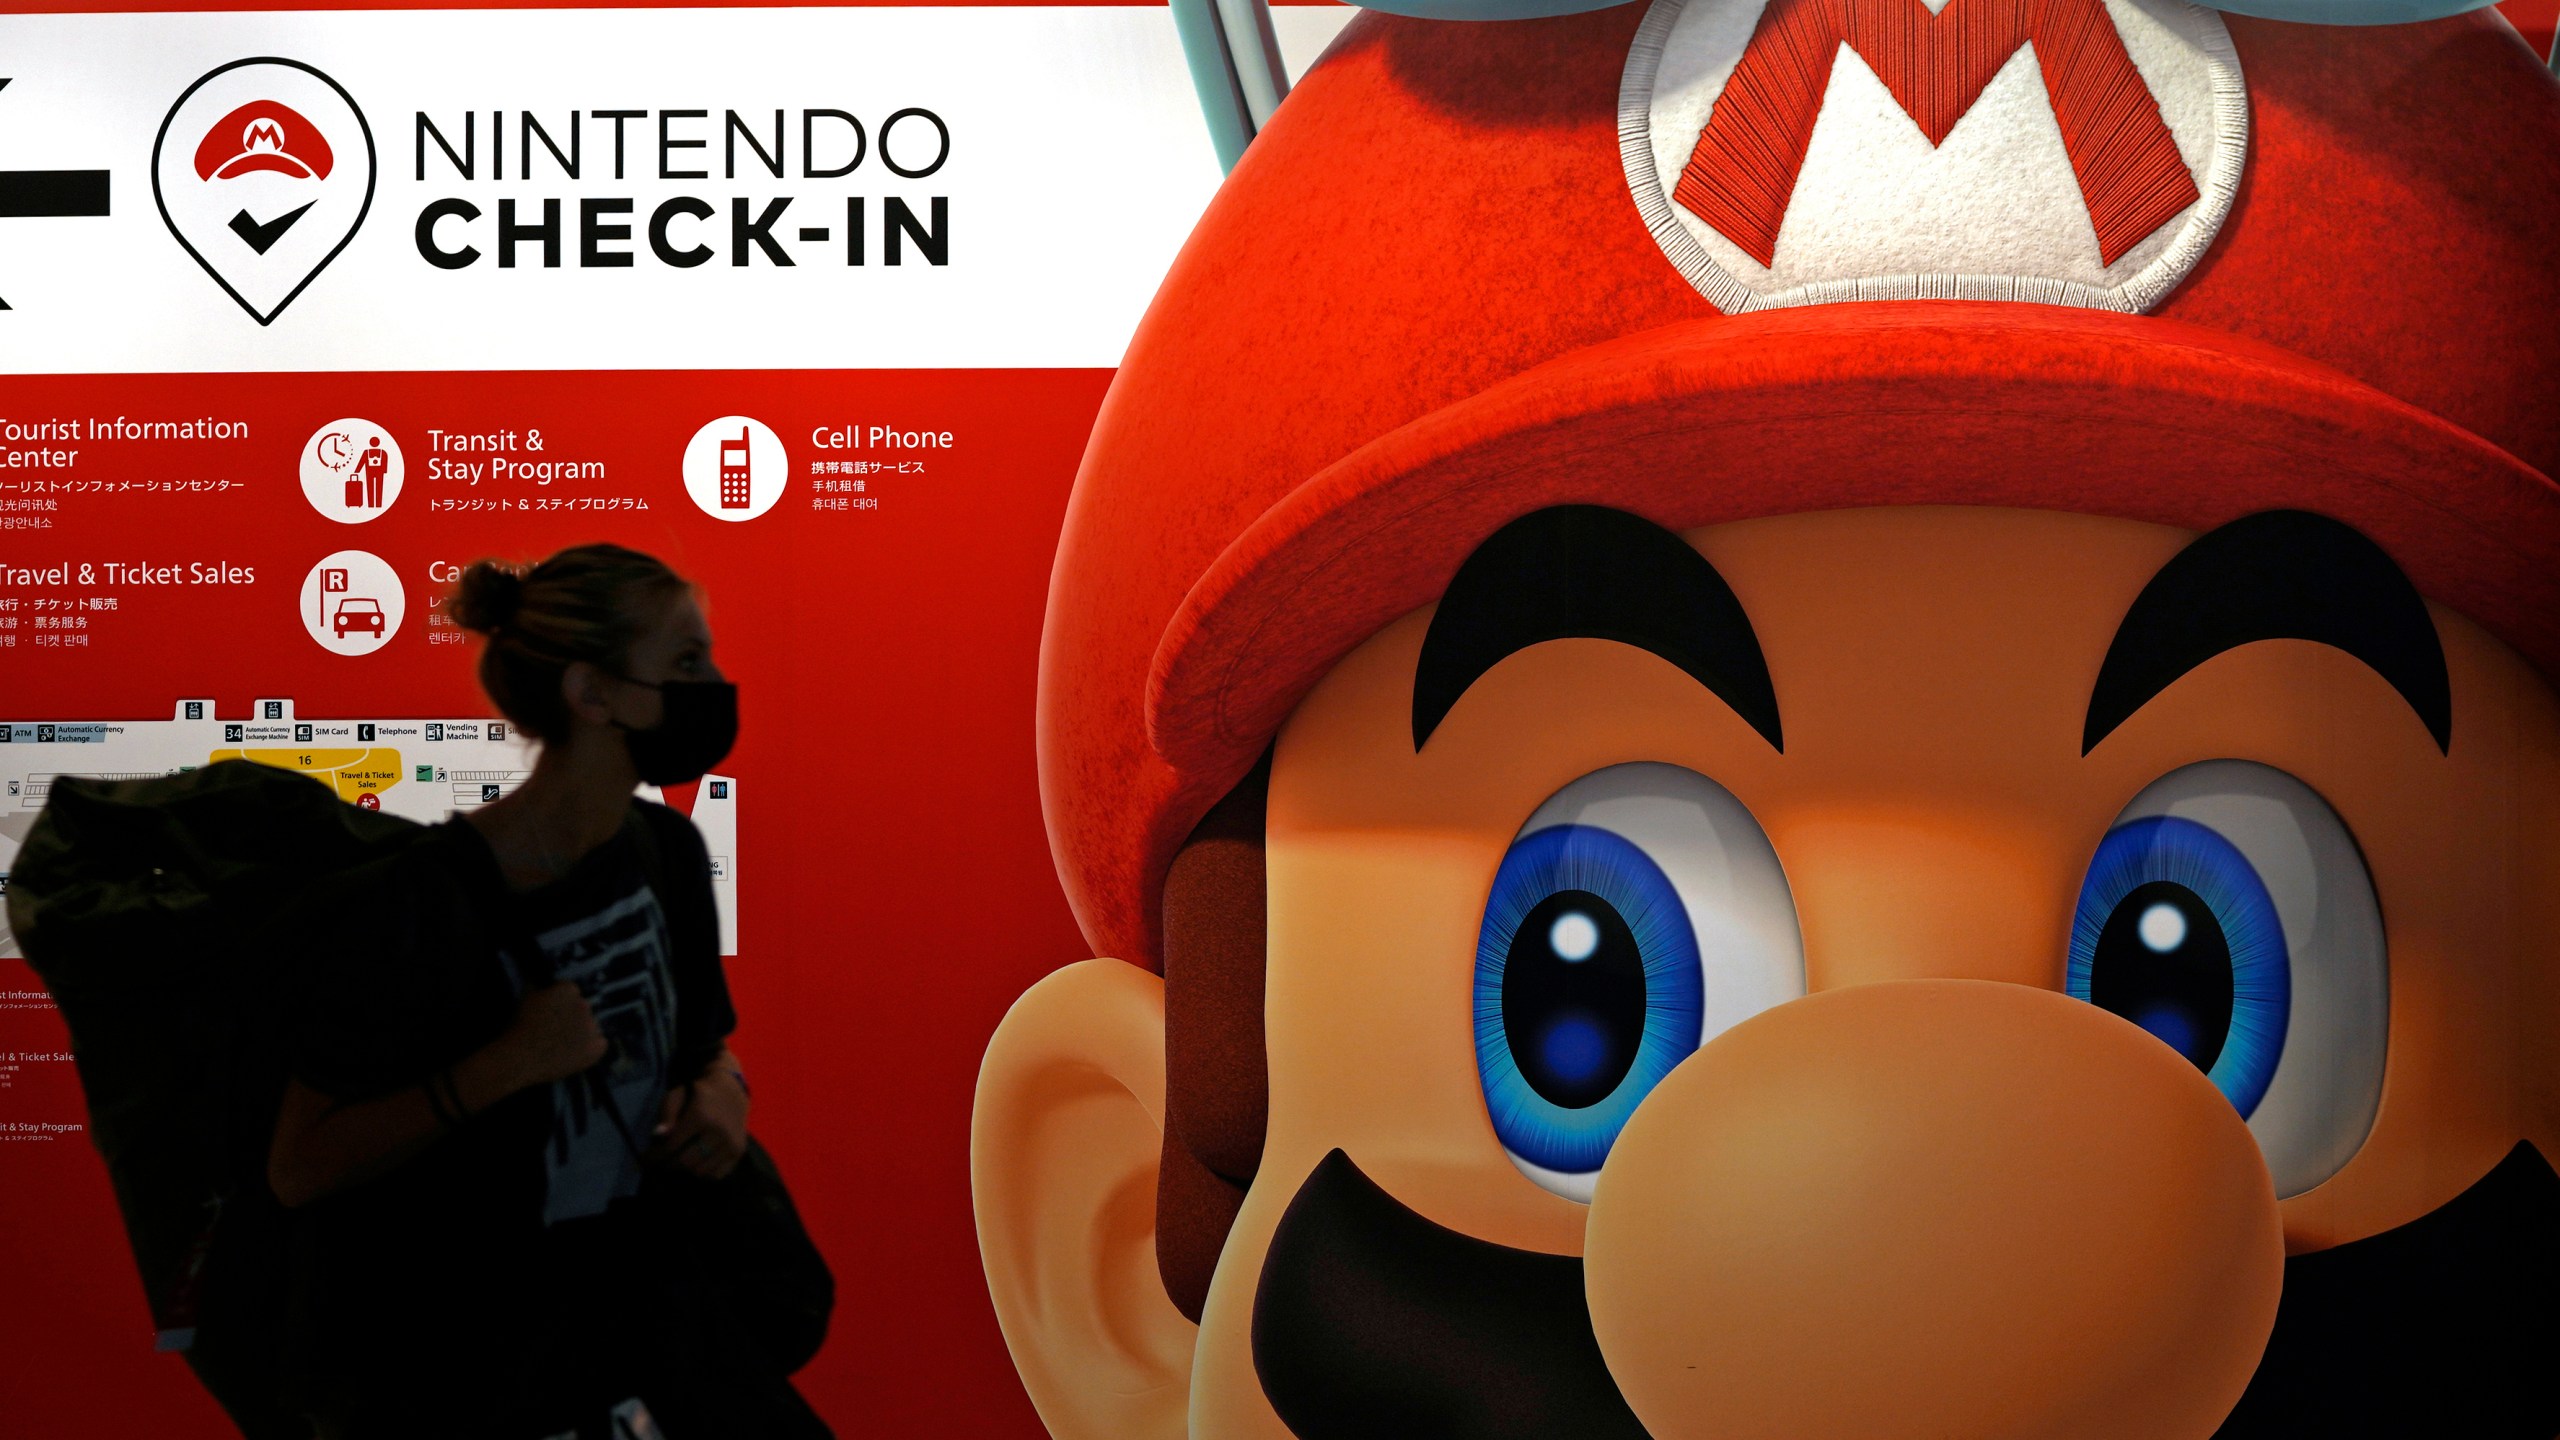 FILE - A traveler walks past an advertisement featuring a Nintendo character at Narita airport in Narita near Tokyo on June 10, 2022. Nintendo has reported healthy sales and profits on the back of the hit “Super Mario Bros. Wonder” game, prompting the Japanese video game maker to raise its full fiscal year forecasts. (AP Photo/Shuji Kajiyama, File)